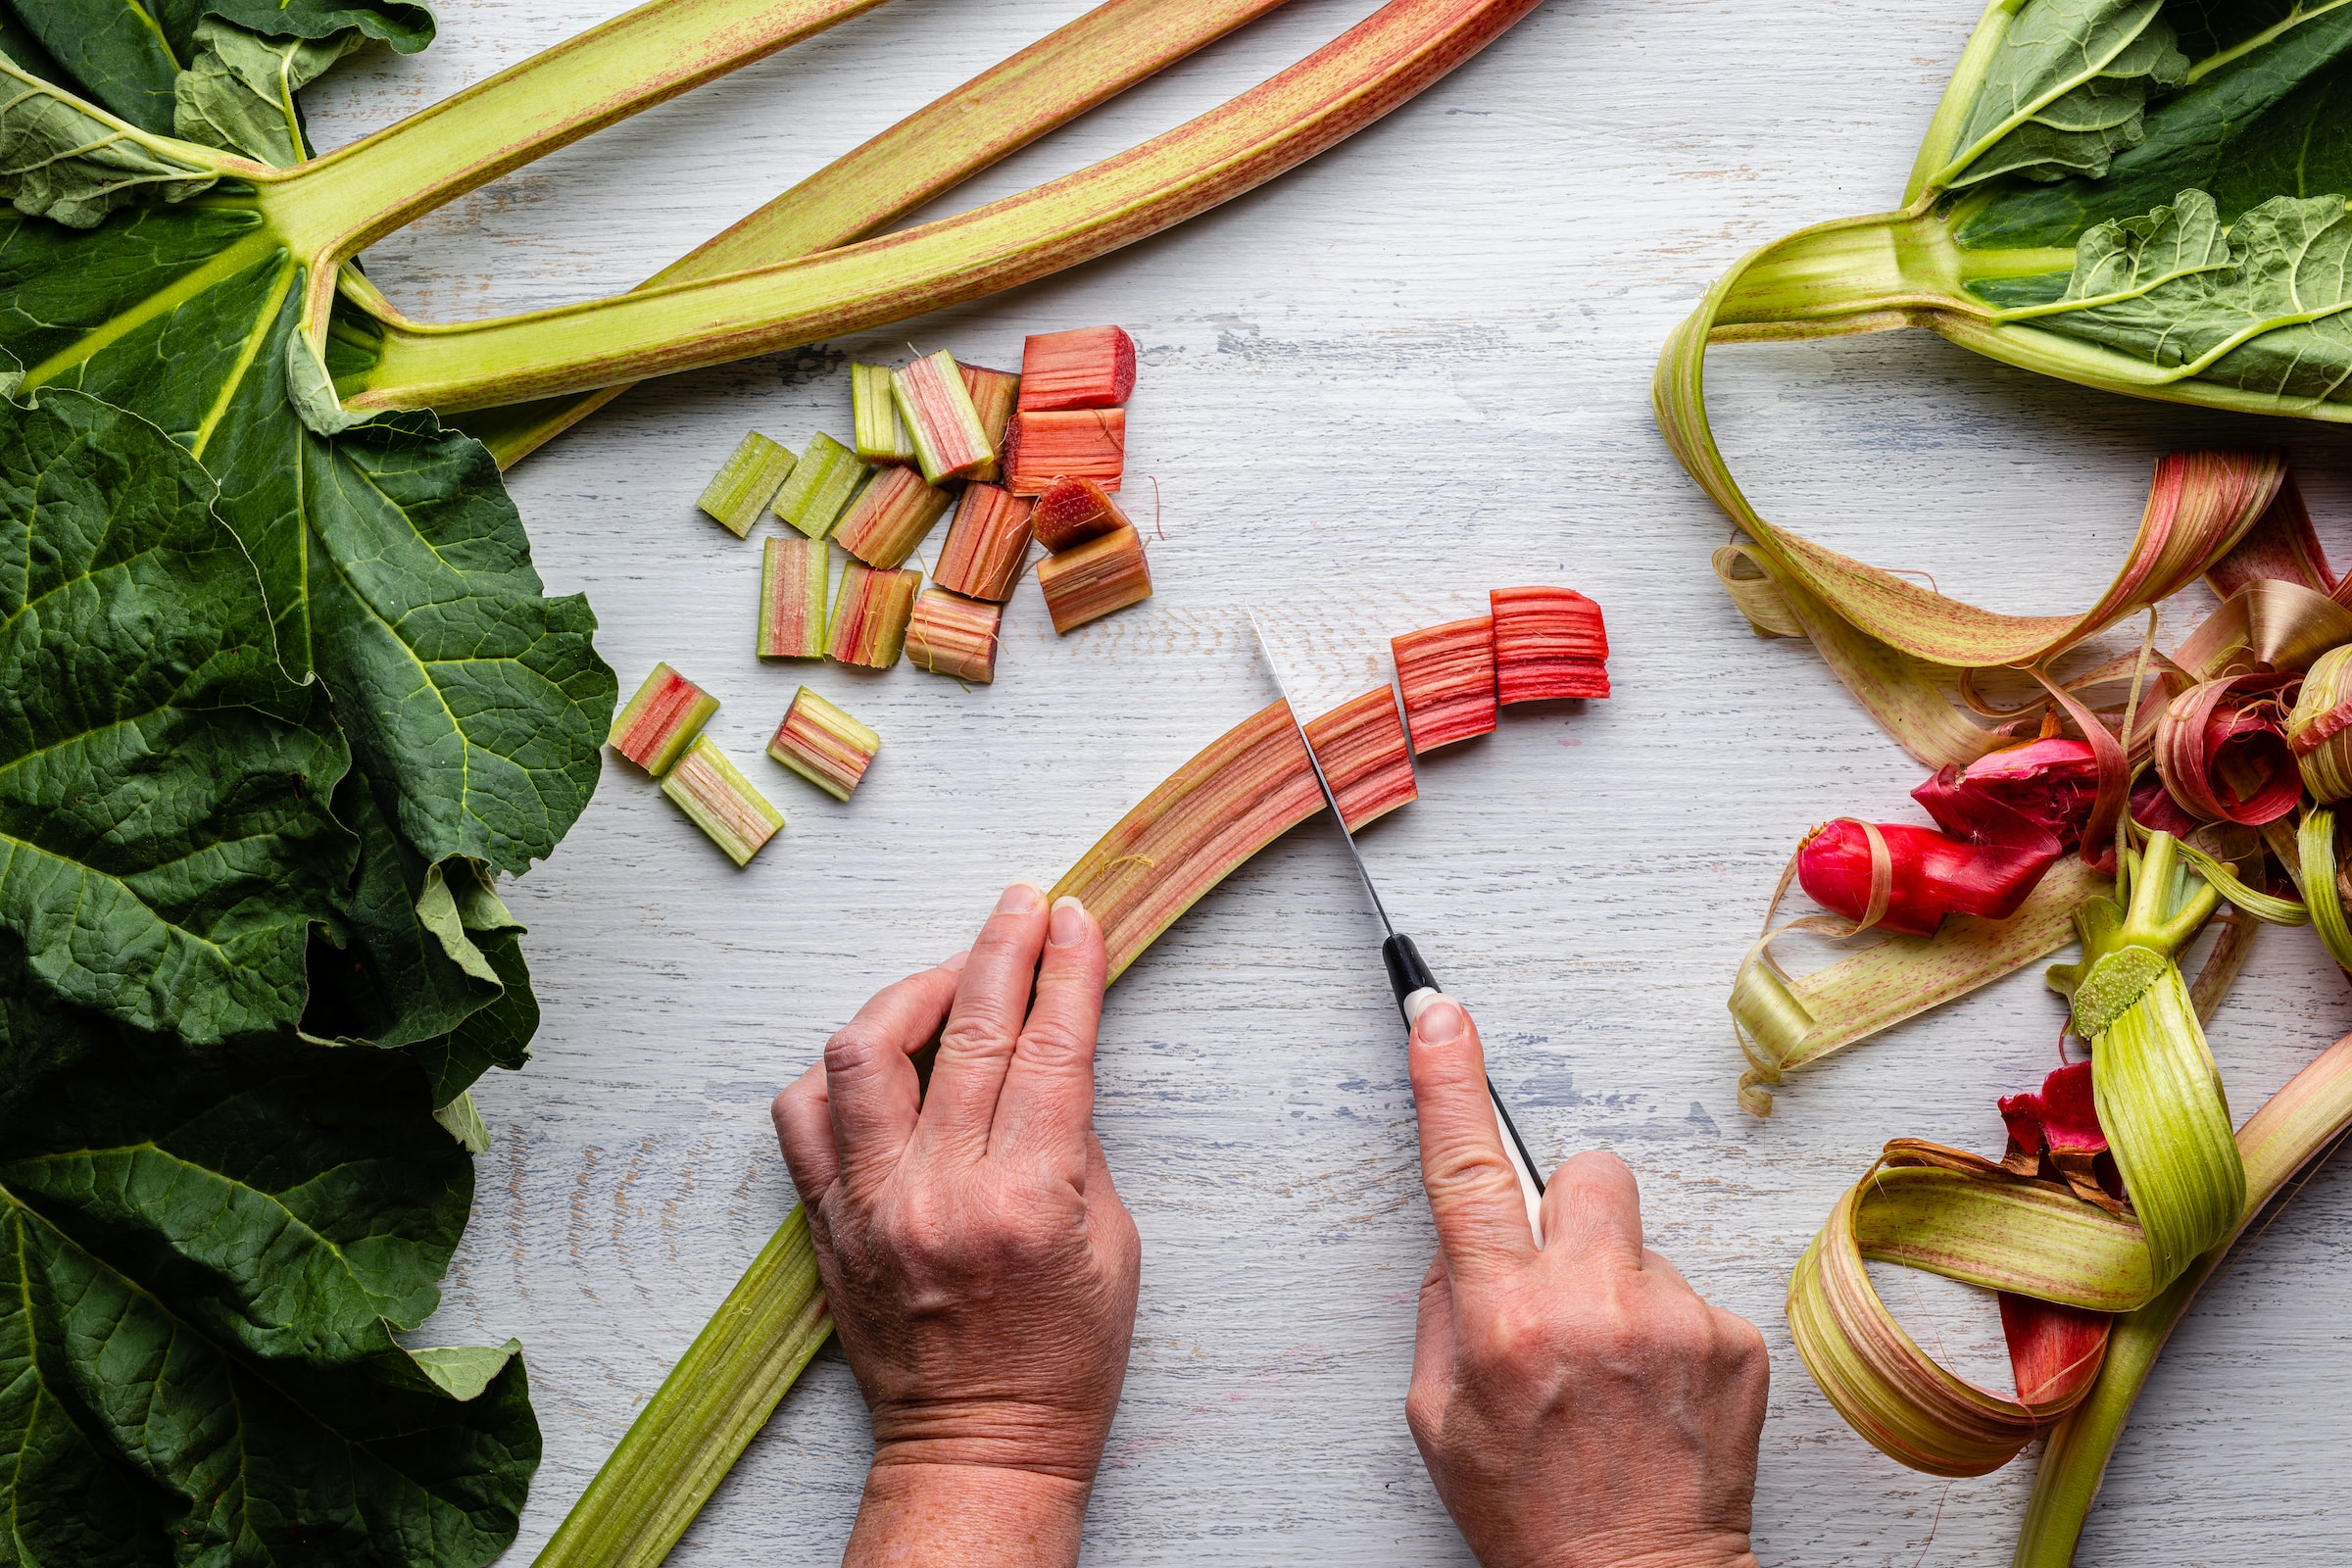 Get Your Rhubarb at Opening Farmers' Market Weekend / May 5, 2022